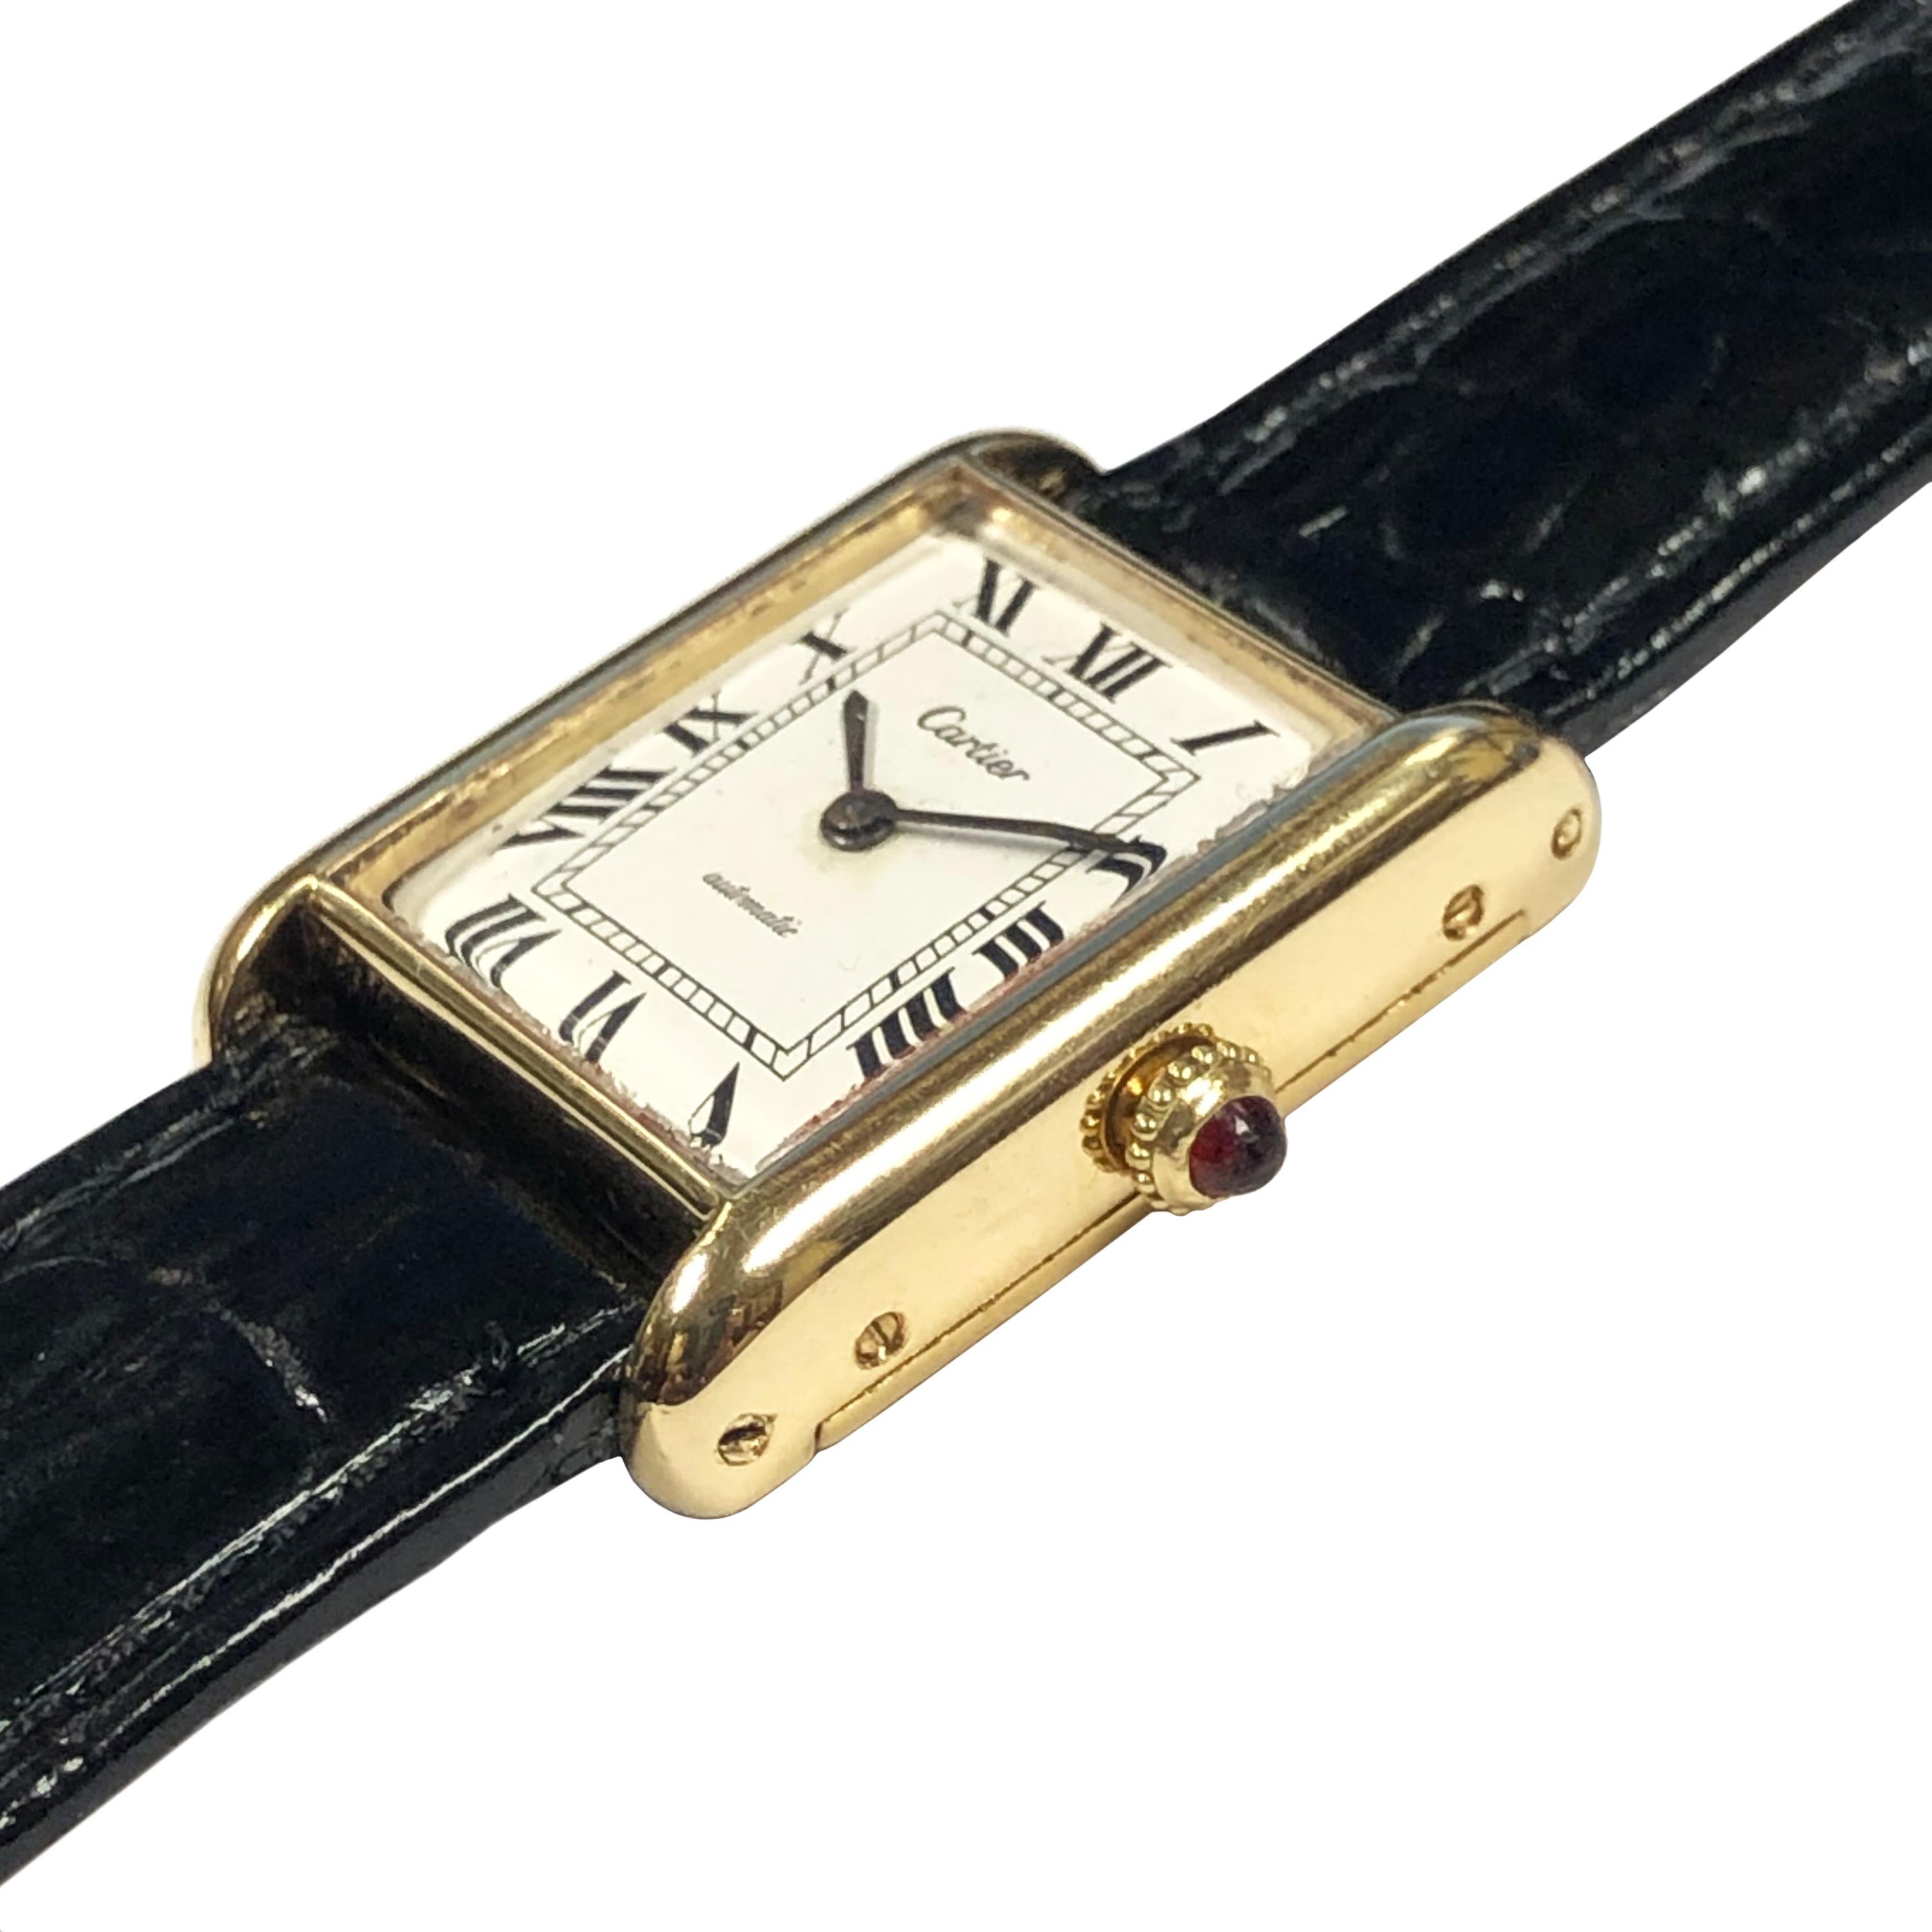 Circa 1980 Cartier Classic Tank Wrist Watch, 30 X 23 M.M. 18K Yellow Gold 2 Piece case, Automatic, self winding movement, White dial with Black Roman Numerals, Ruby crown. New Hadley Roma Black leather strap with a Cartier Gold Plate Tang Buckle.